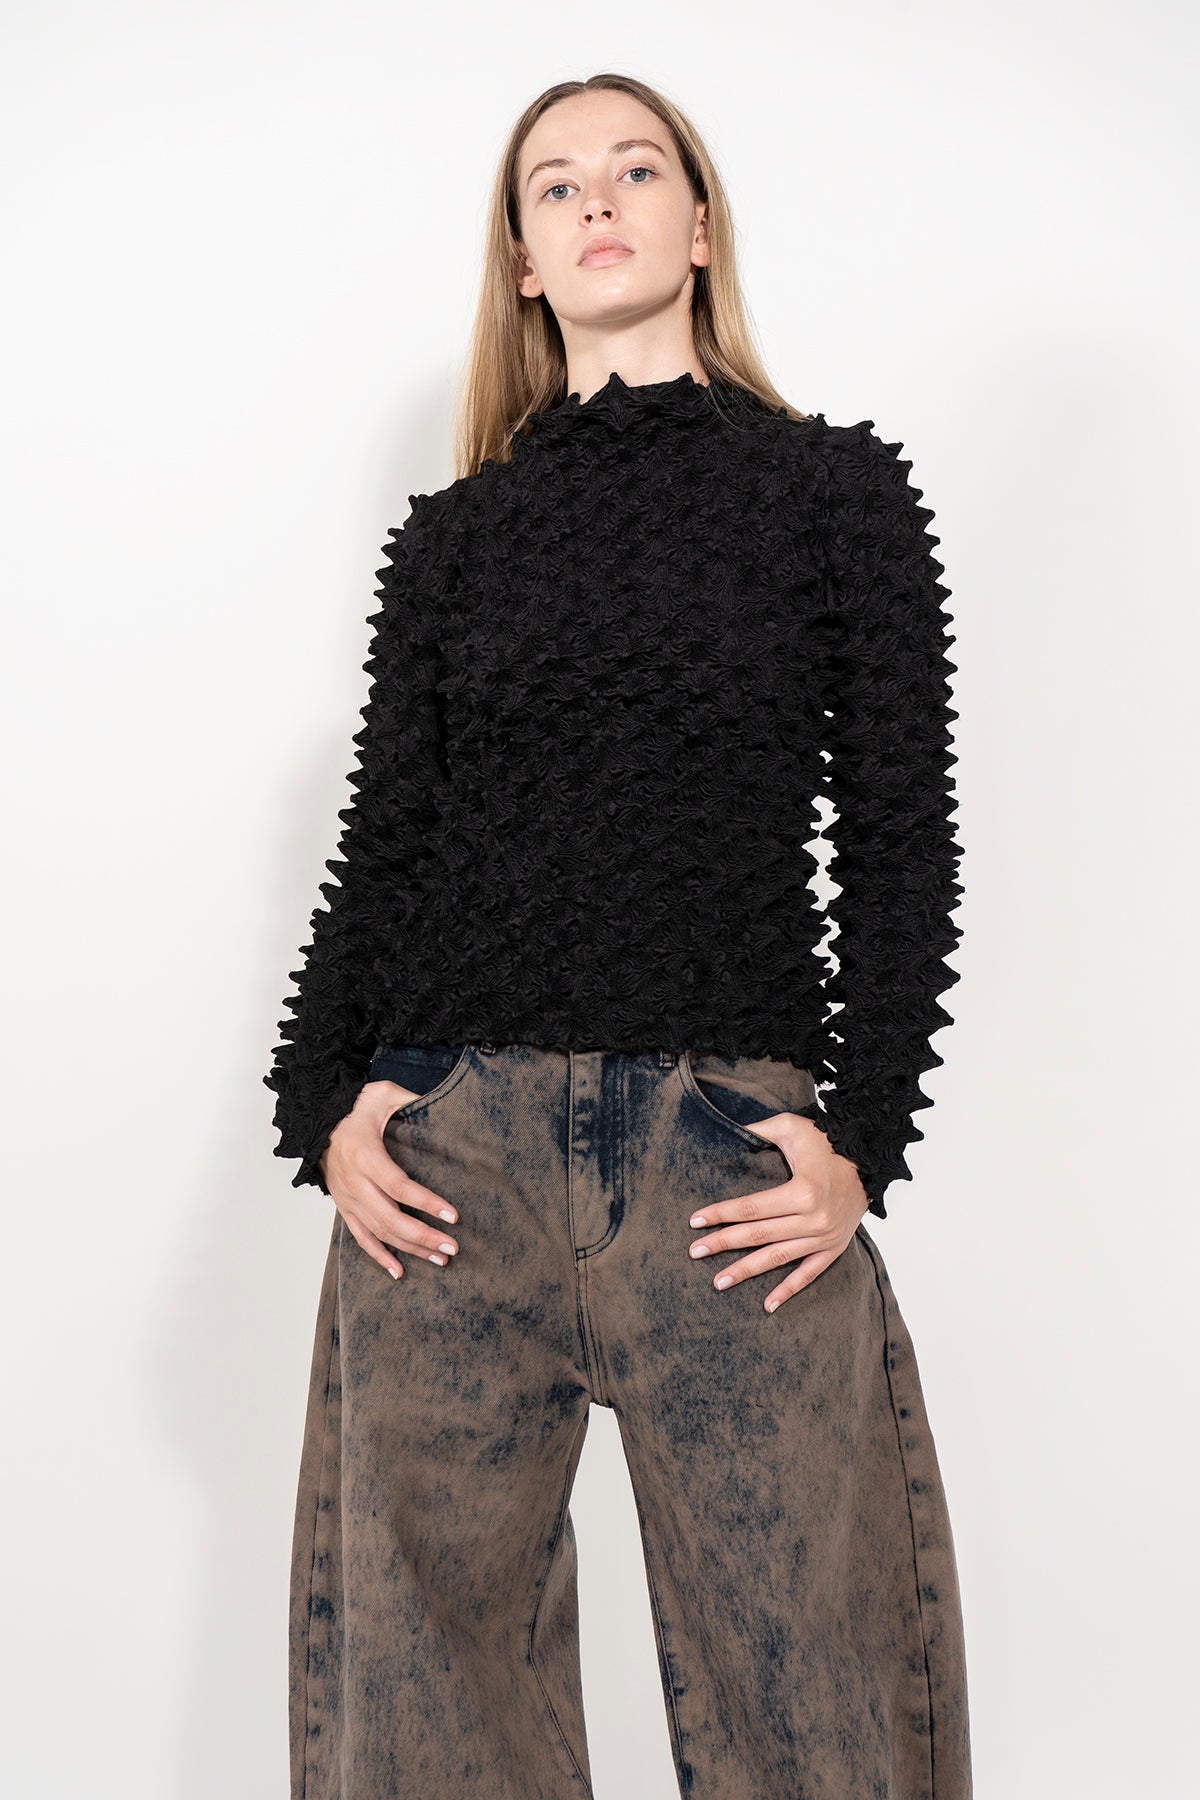 BLACK SPIKED TOP MARQUES ALMEIDA